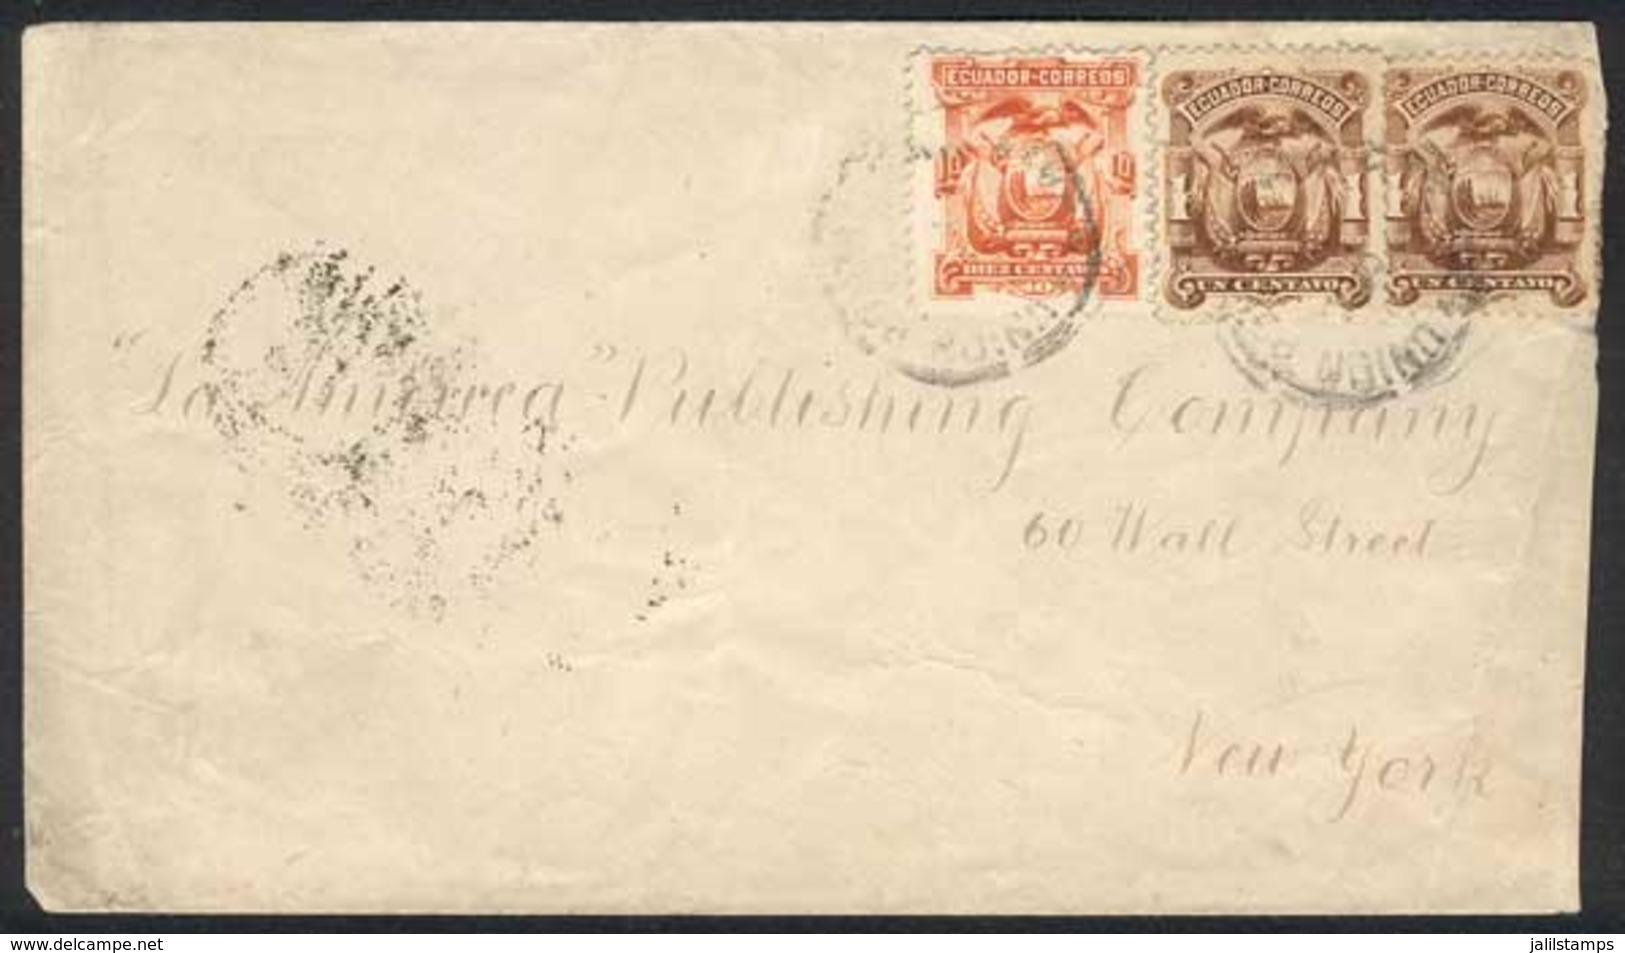 ECUADOR: Cover Franked With 1c. Pair + 10c. (Sc.12 Pair + 15), Sent From Guayaquil To New York On 5/MAY/1890, Arrival Ba - Ecuador